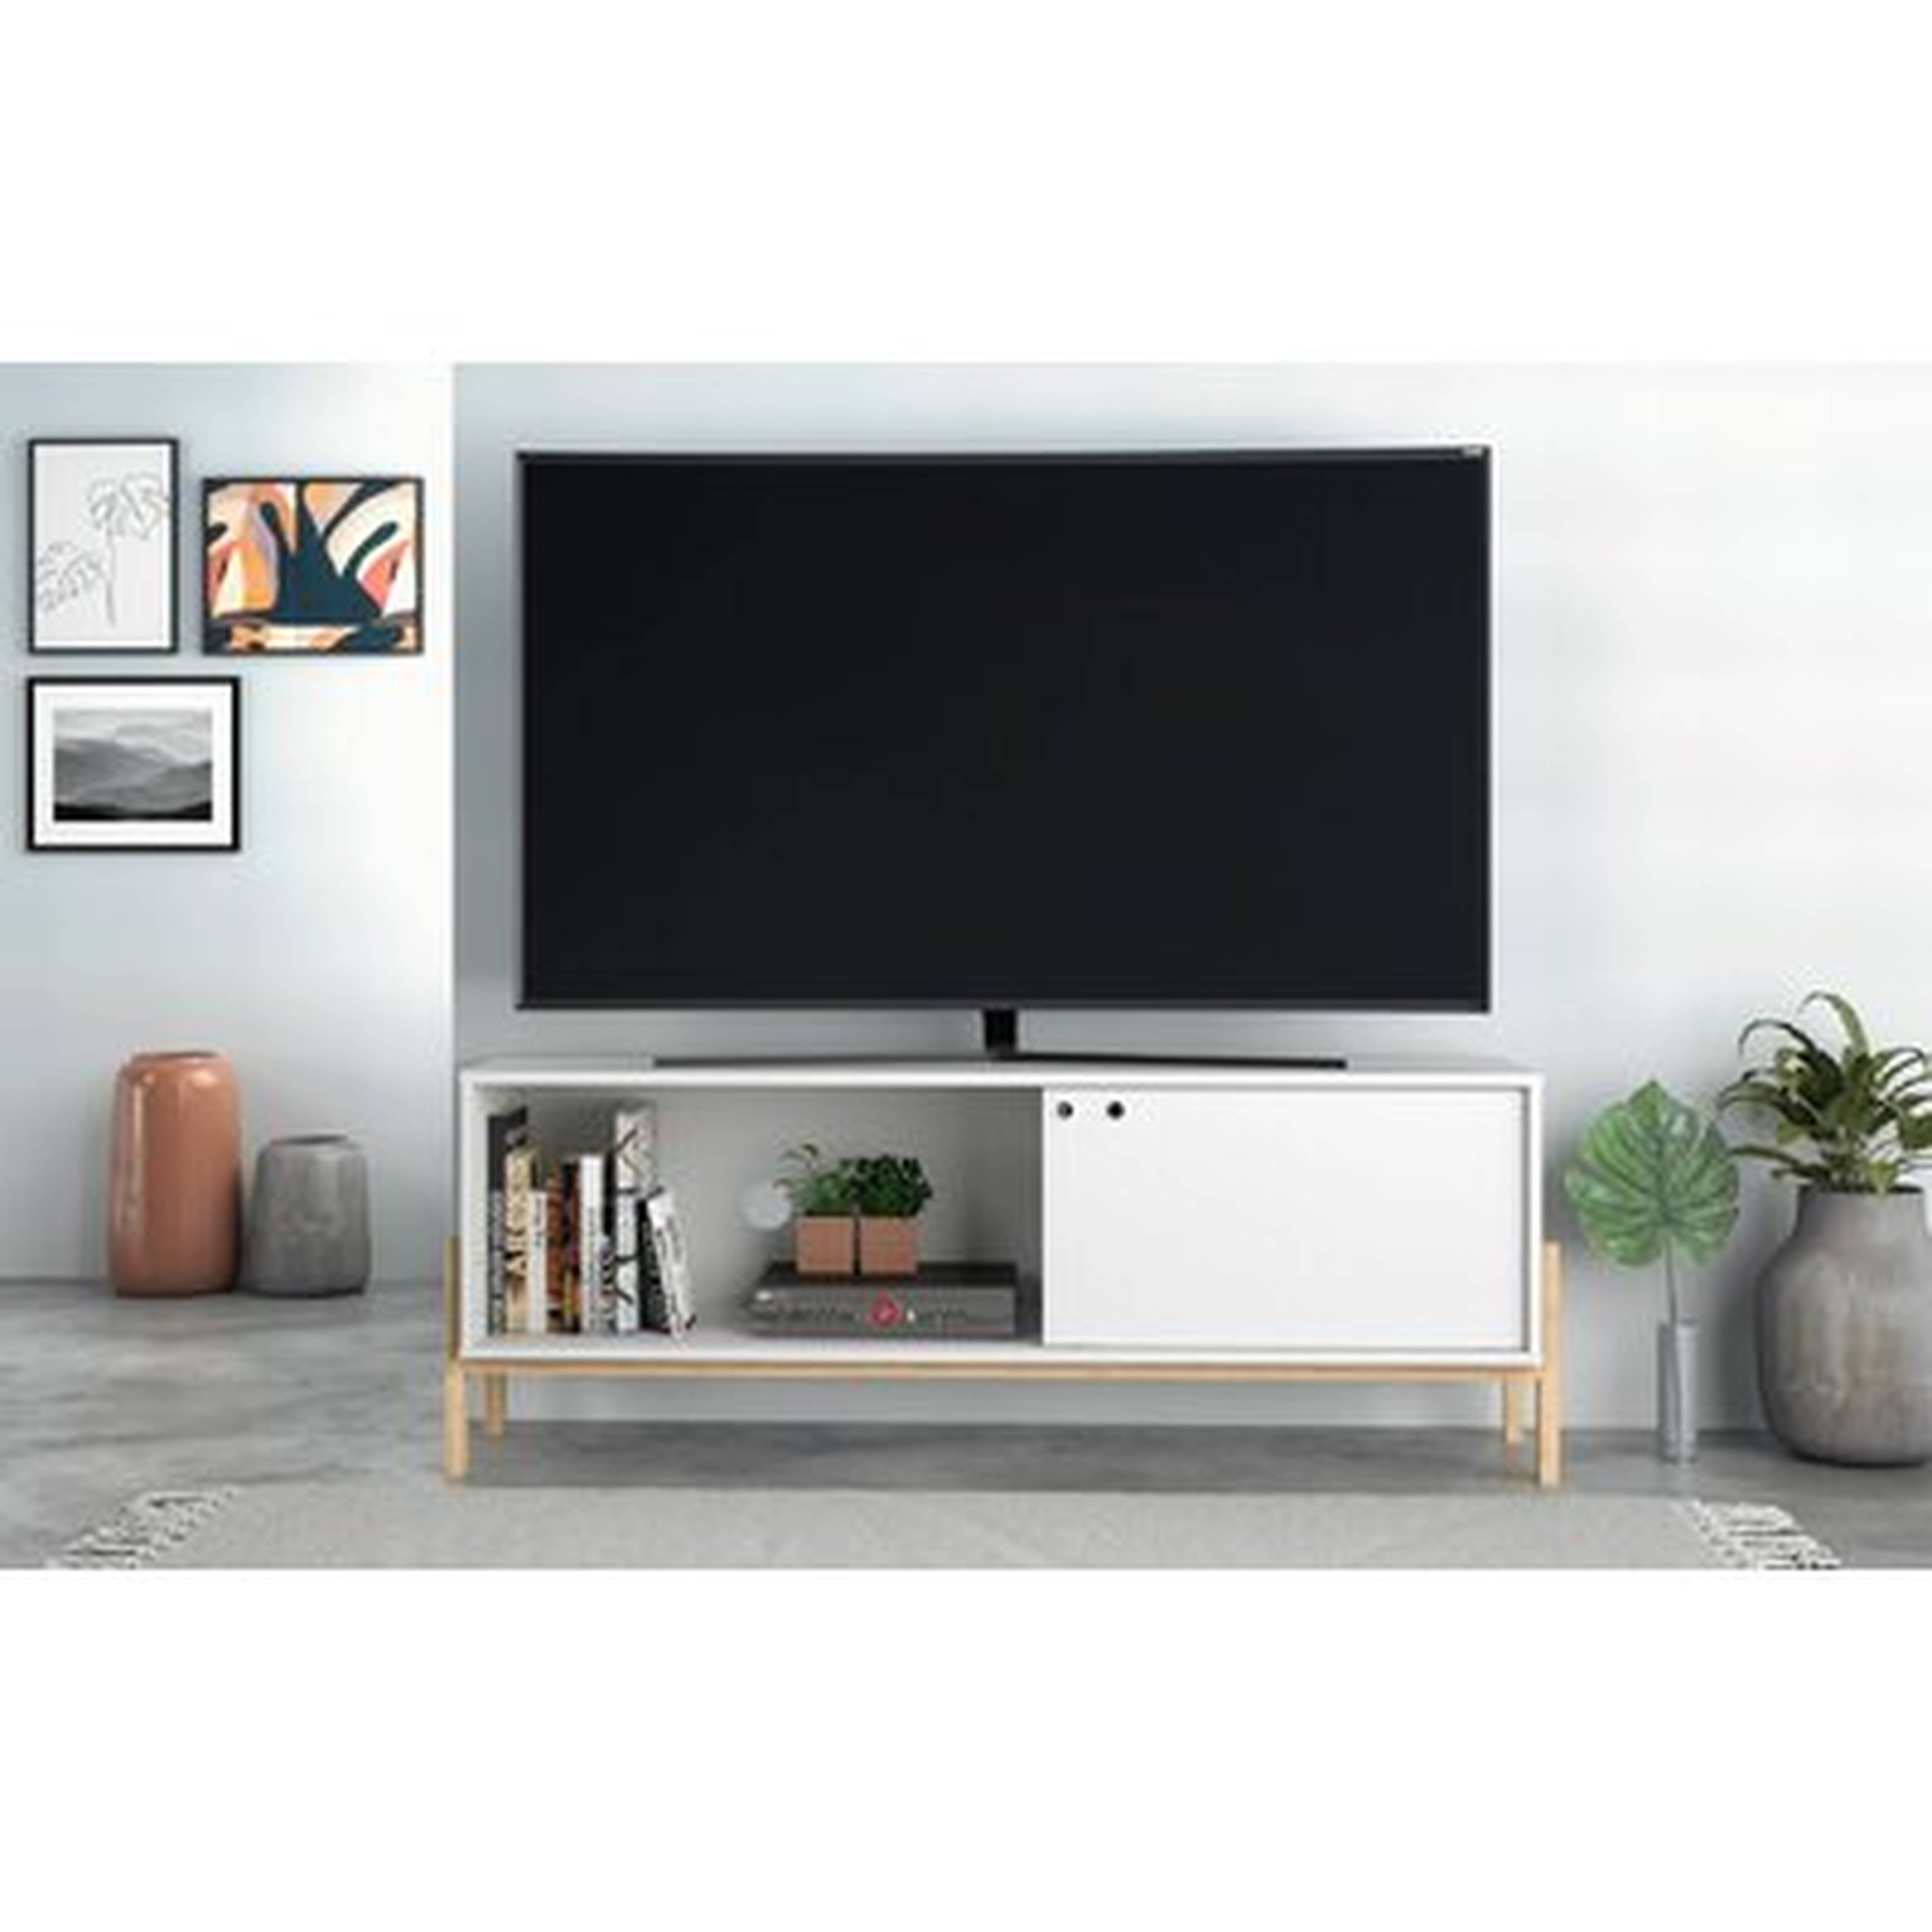 Sandry TV Stand for TVs up to 50" - Wayfair